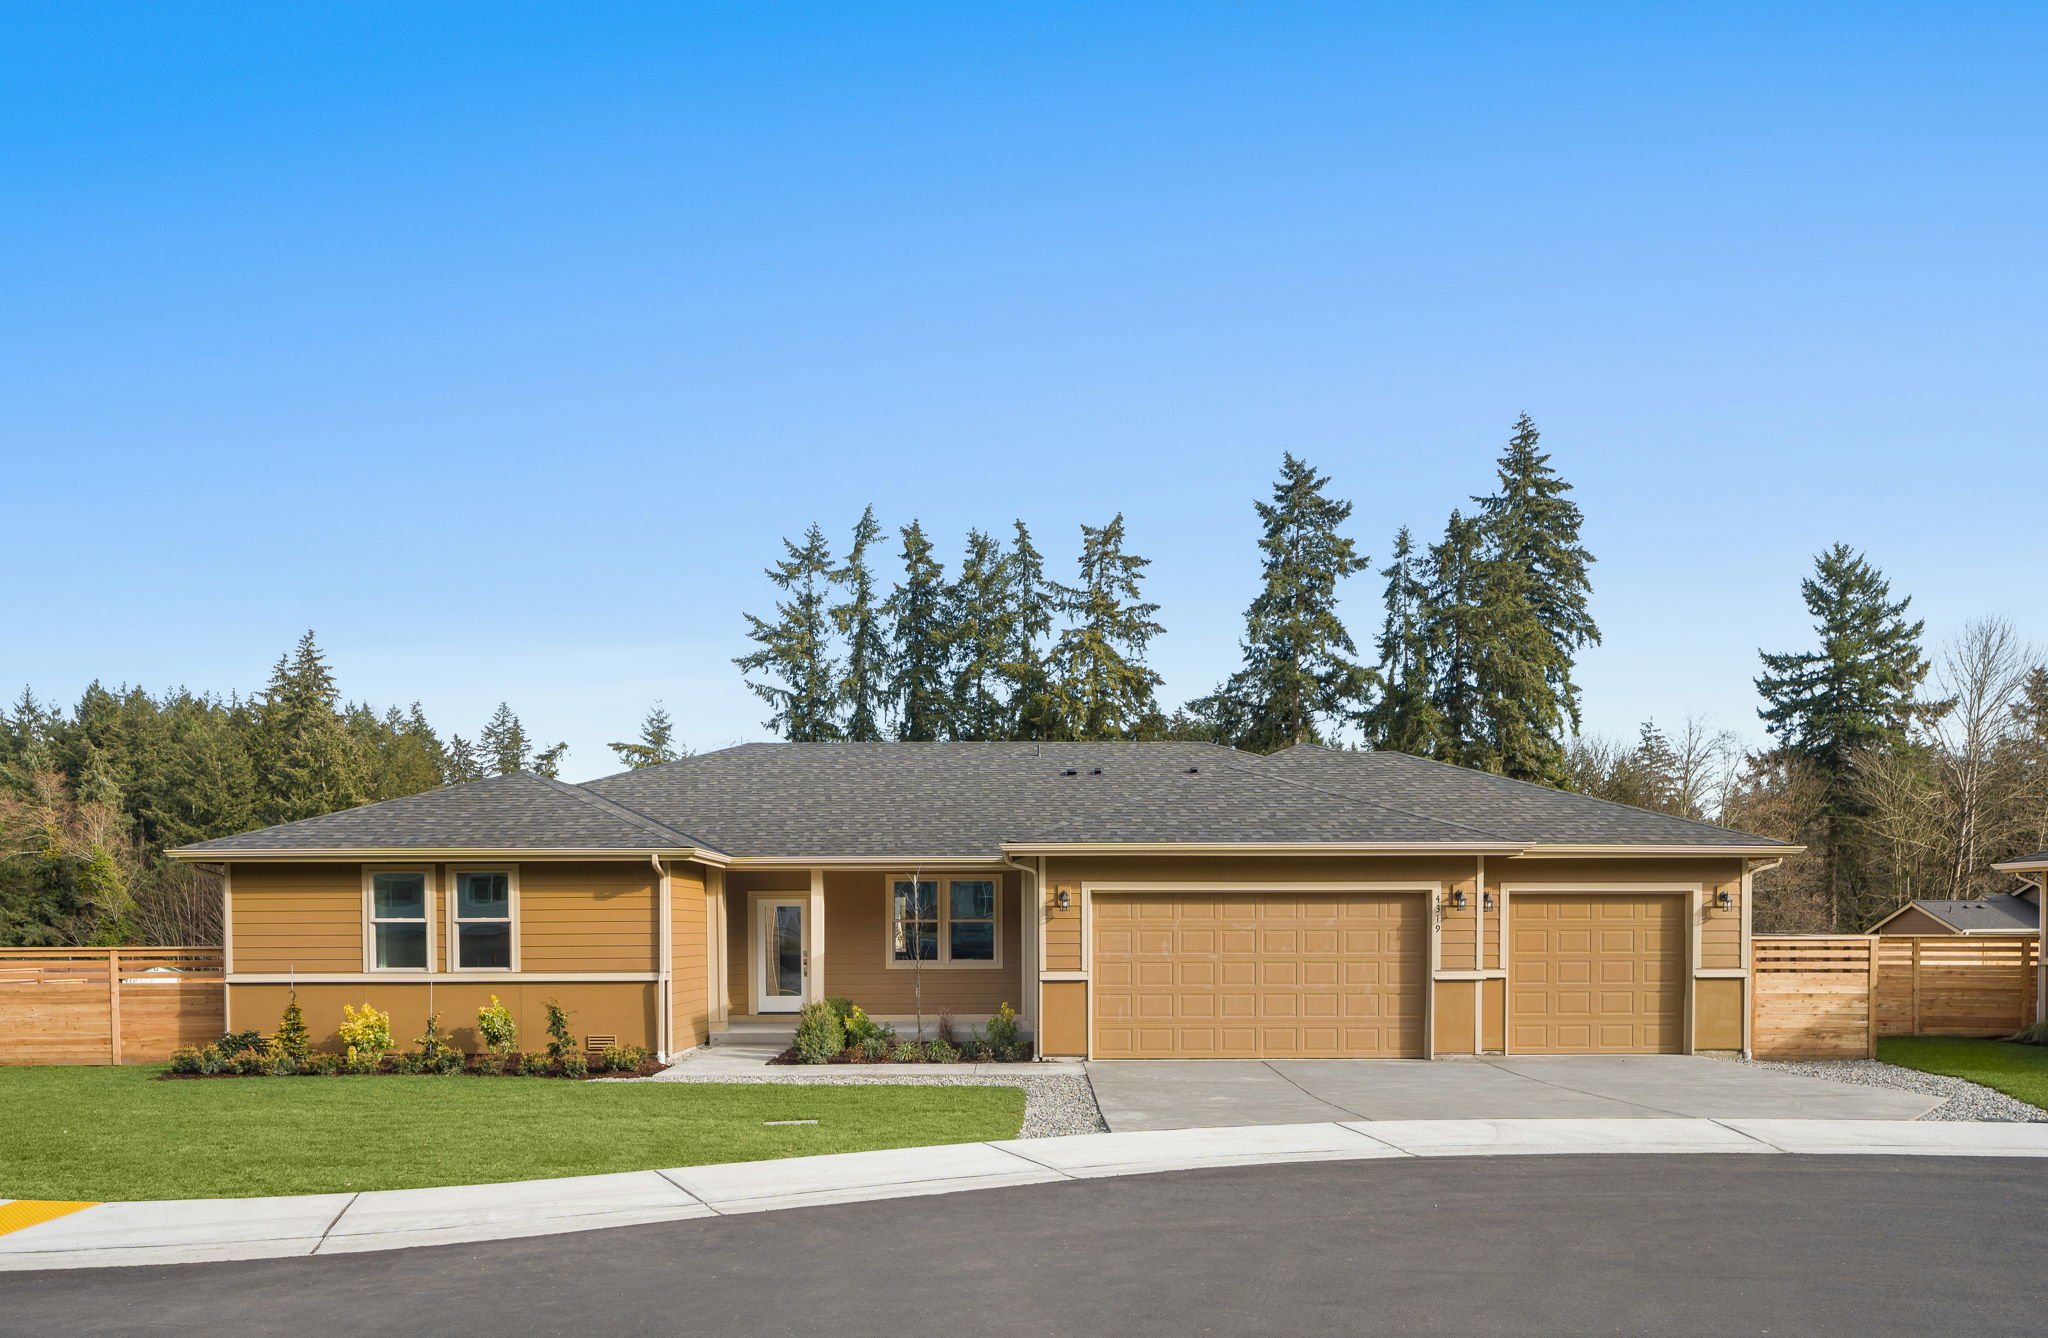 4319 S 325th AVE S, FEDERAL WAY | SOLD AT $780,000